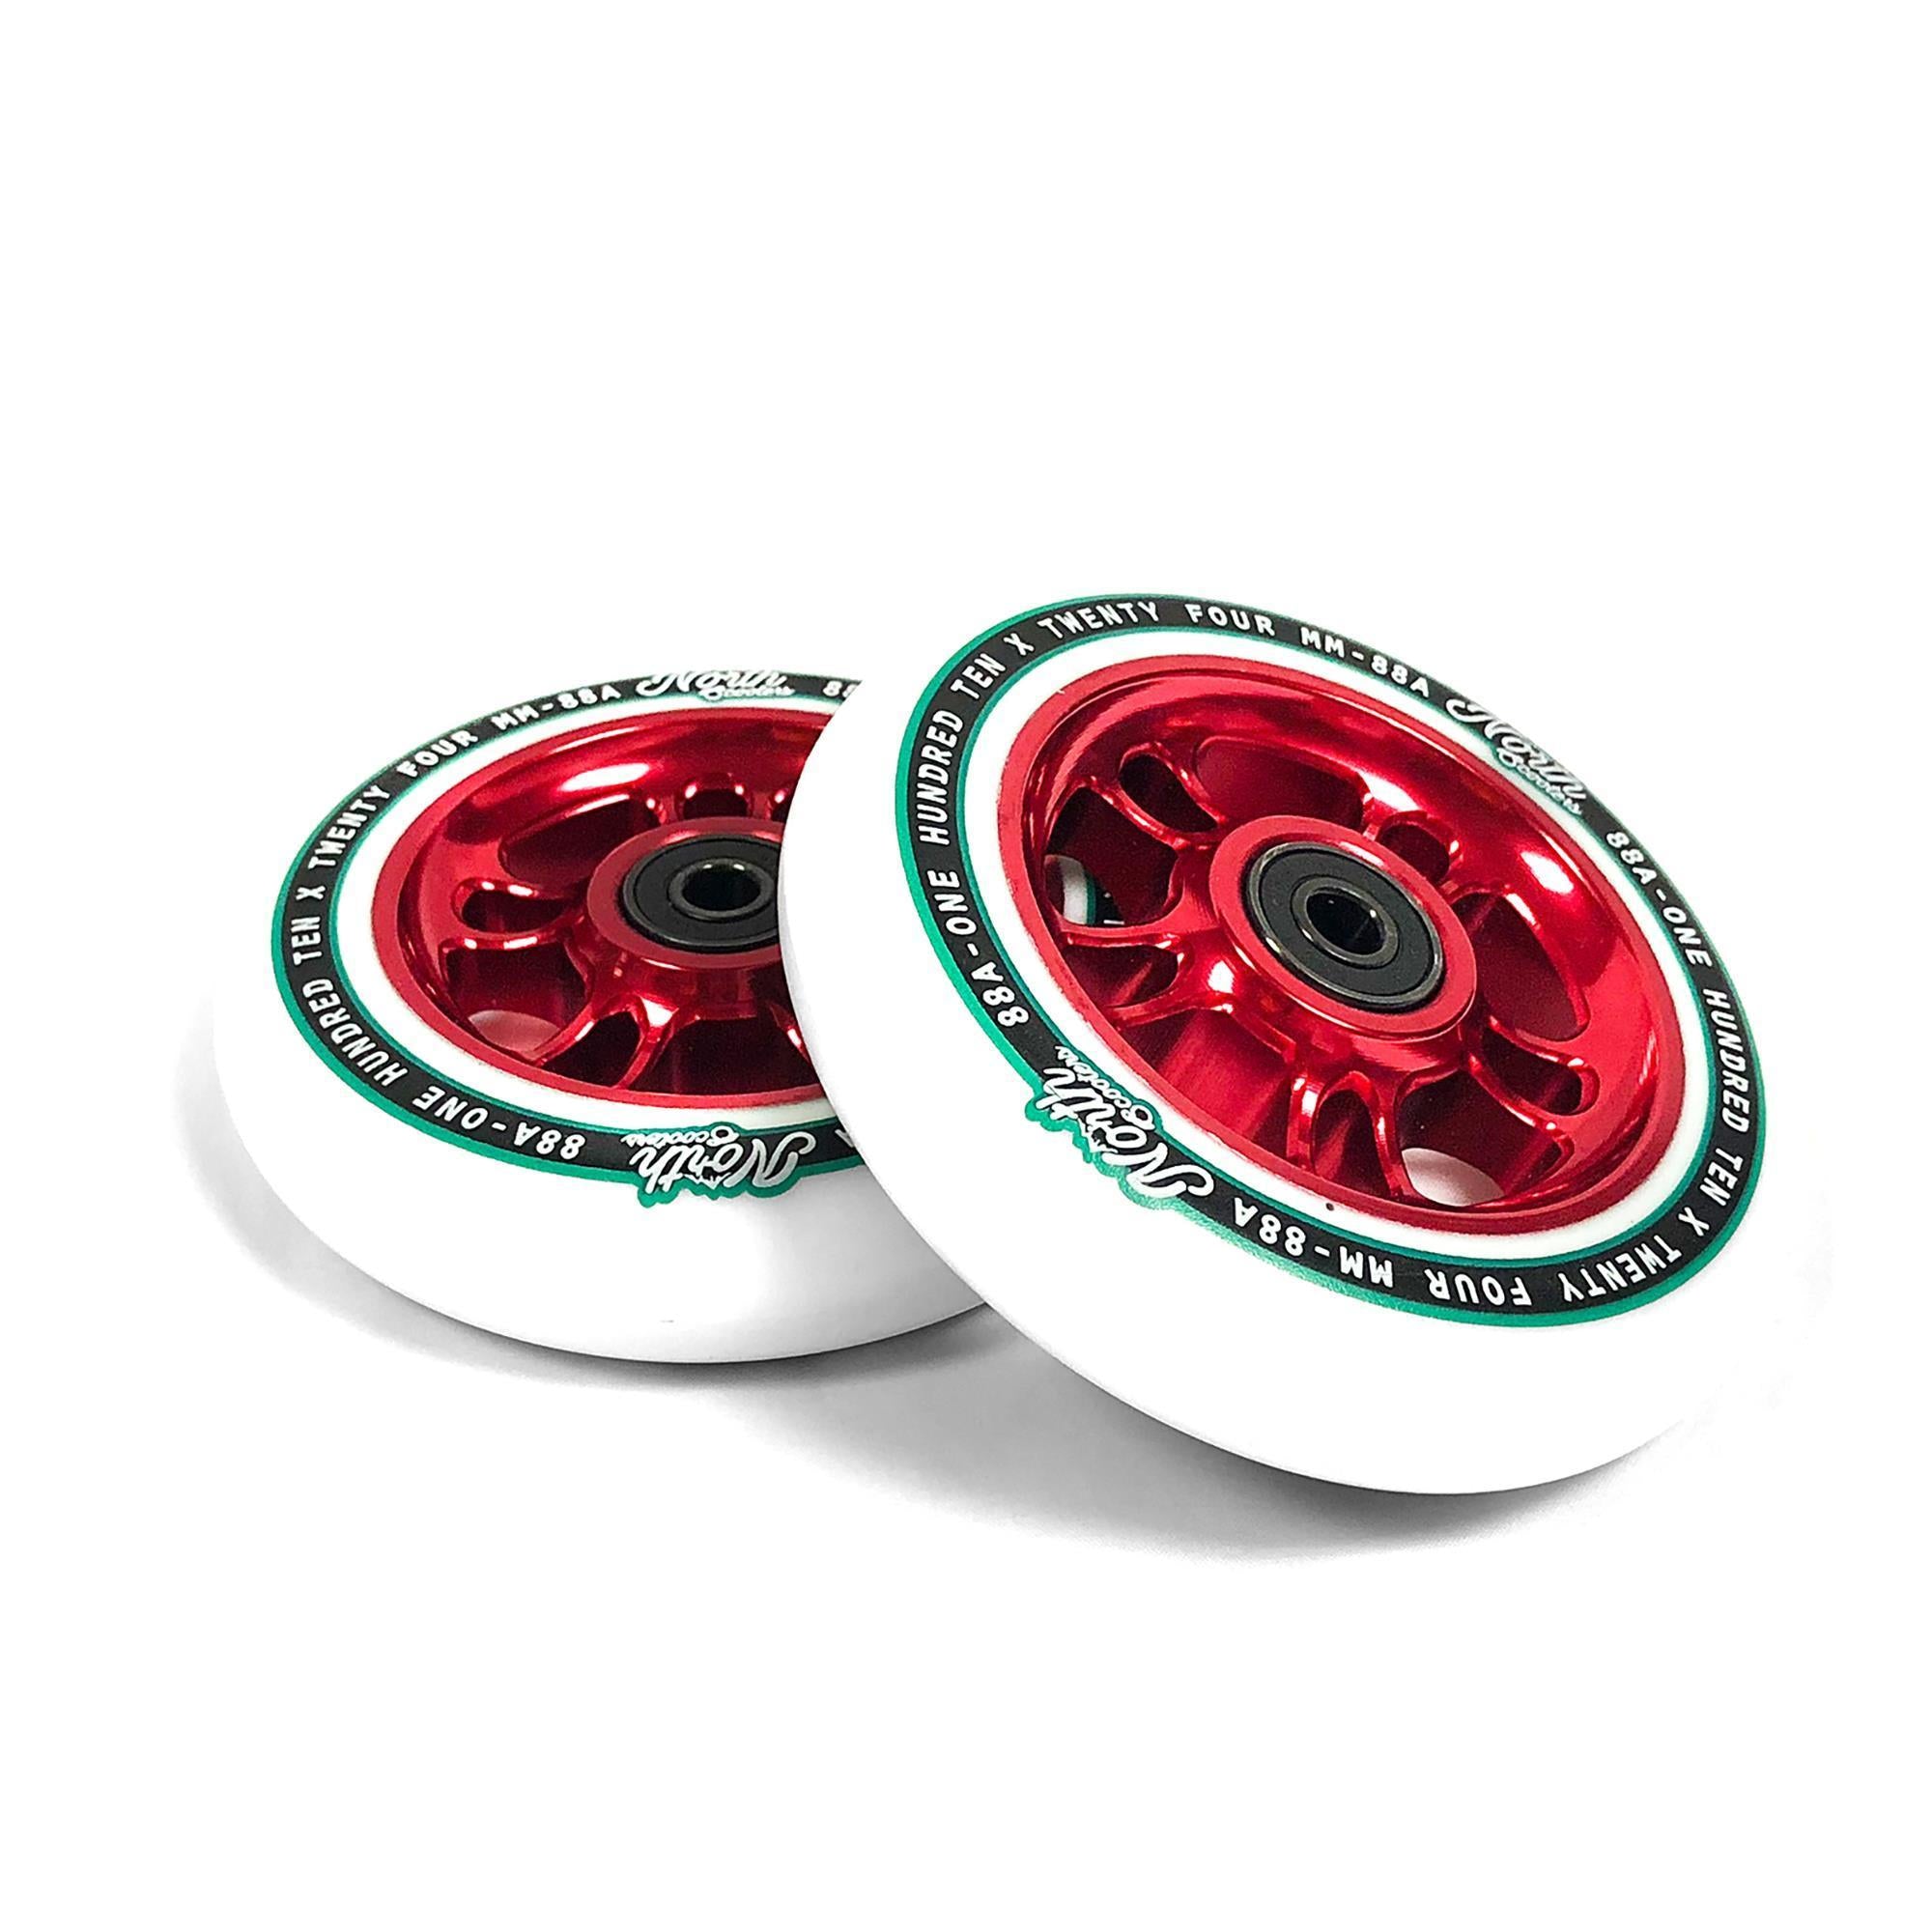 North Scooters Wagon 110mm White PU (PAIR) - Scooter Wheels Red